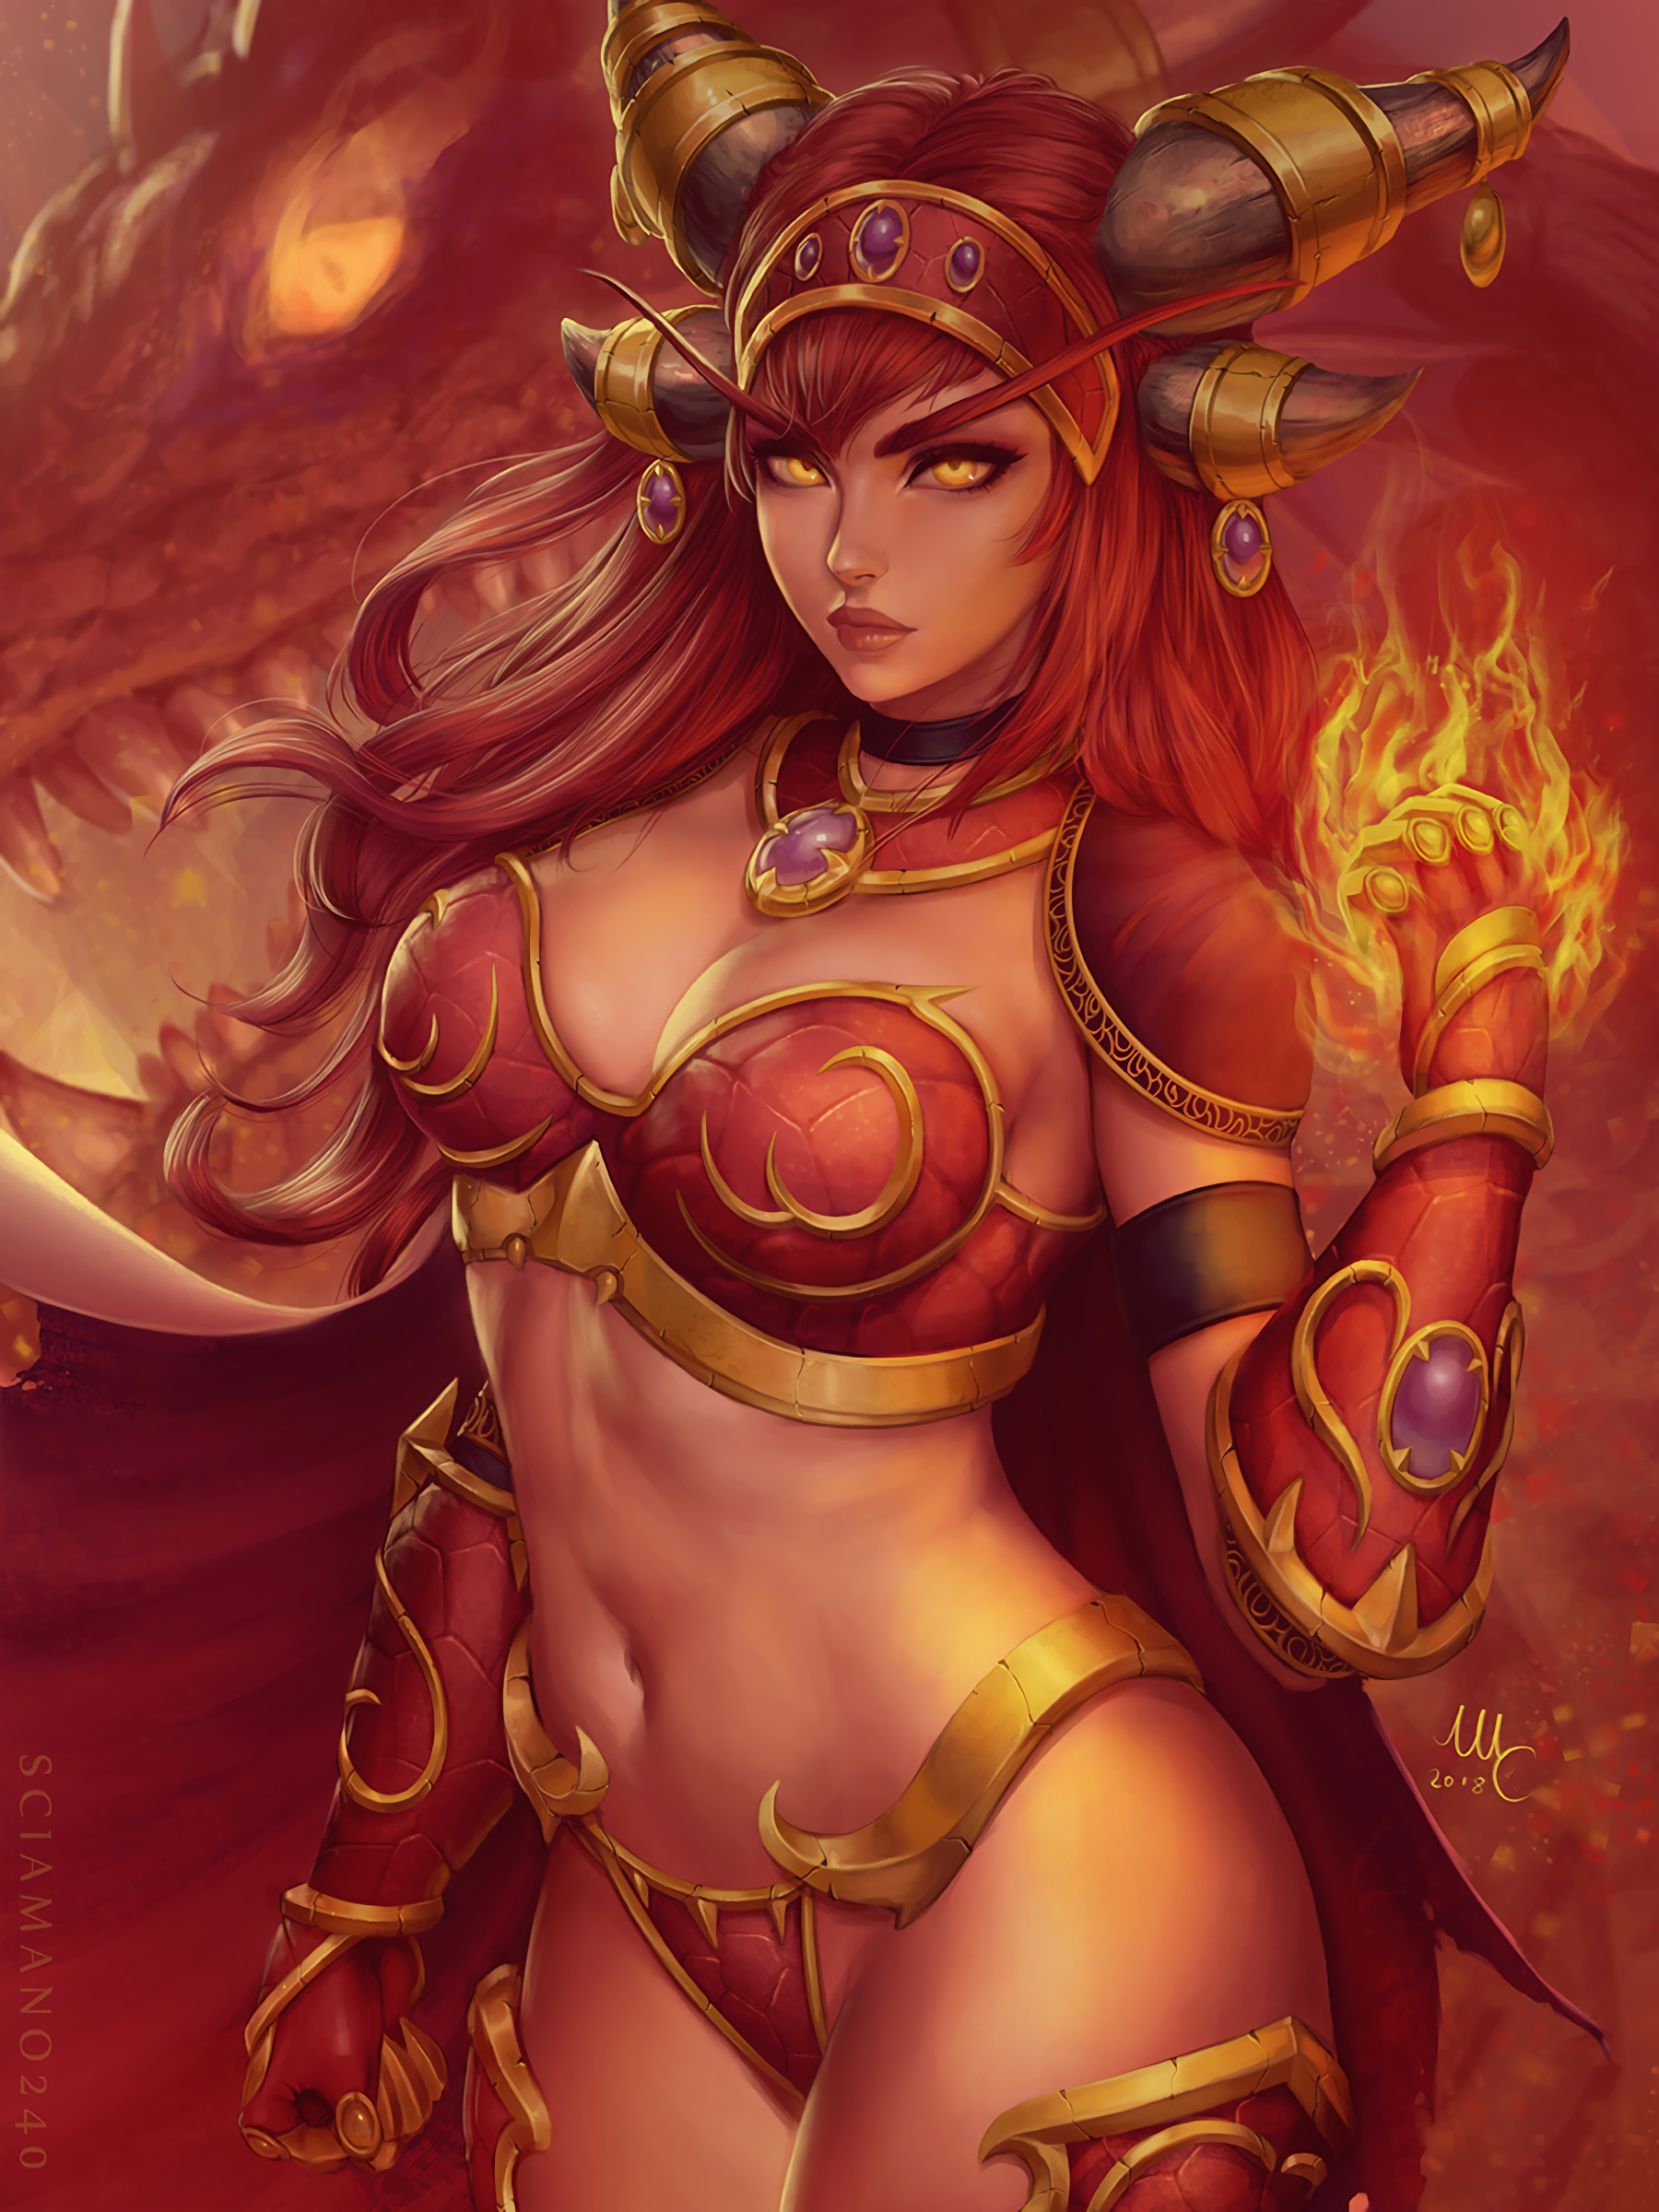 General 1800x2400 digital art artwork women redhead Mirco Cabbia looking at viewer Blizzard Entertainment tight clothing Alexstraza Alexstrasza Warcraft World of Warcraft video games yellow eyes horns belly cleavage choker